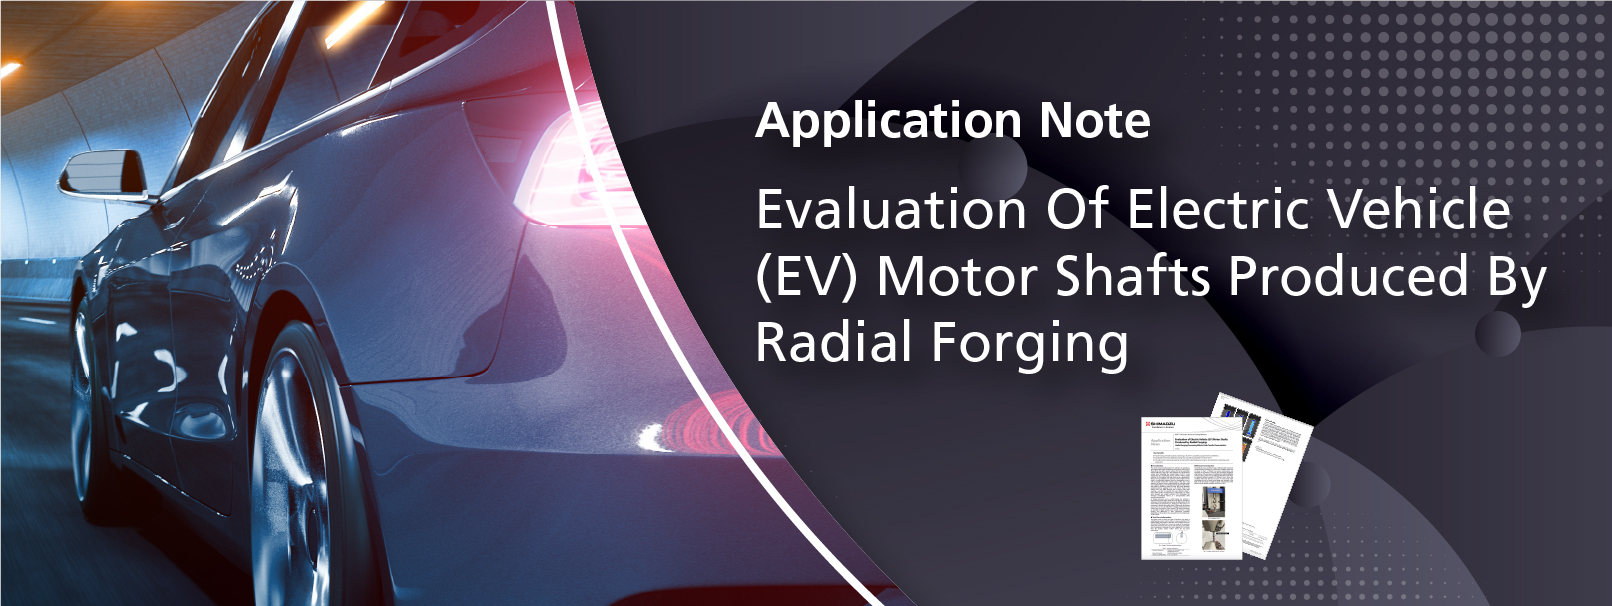 Evaluation of Electric Vehicle Motor Shafts Produced by Radial Forging